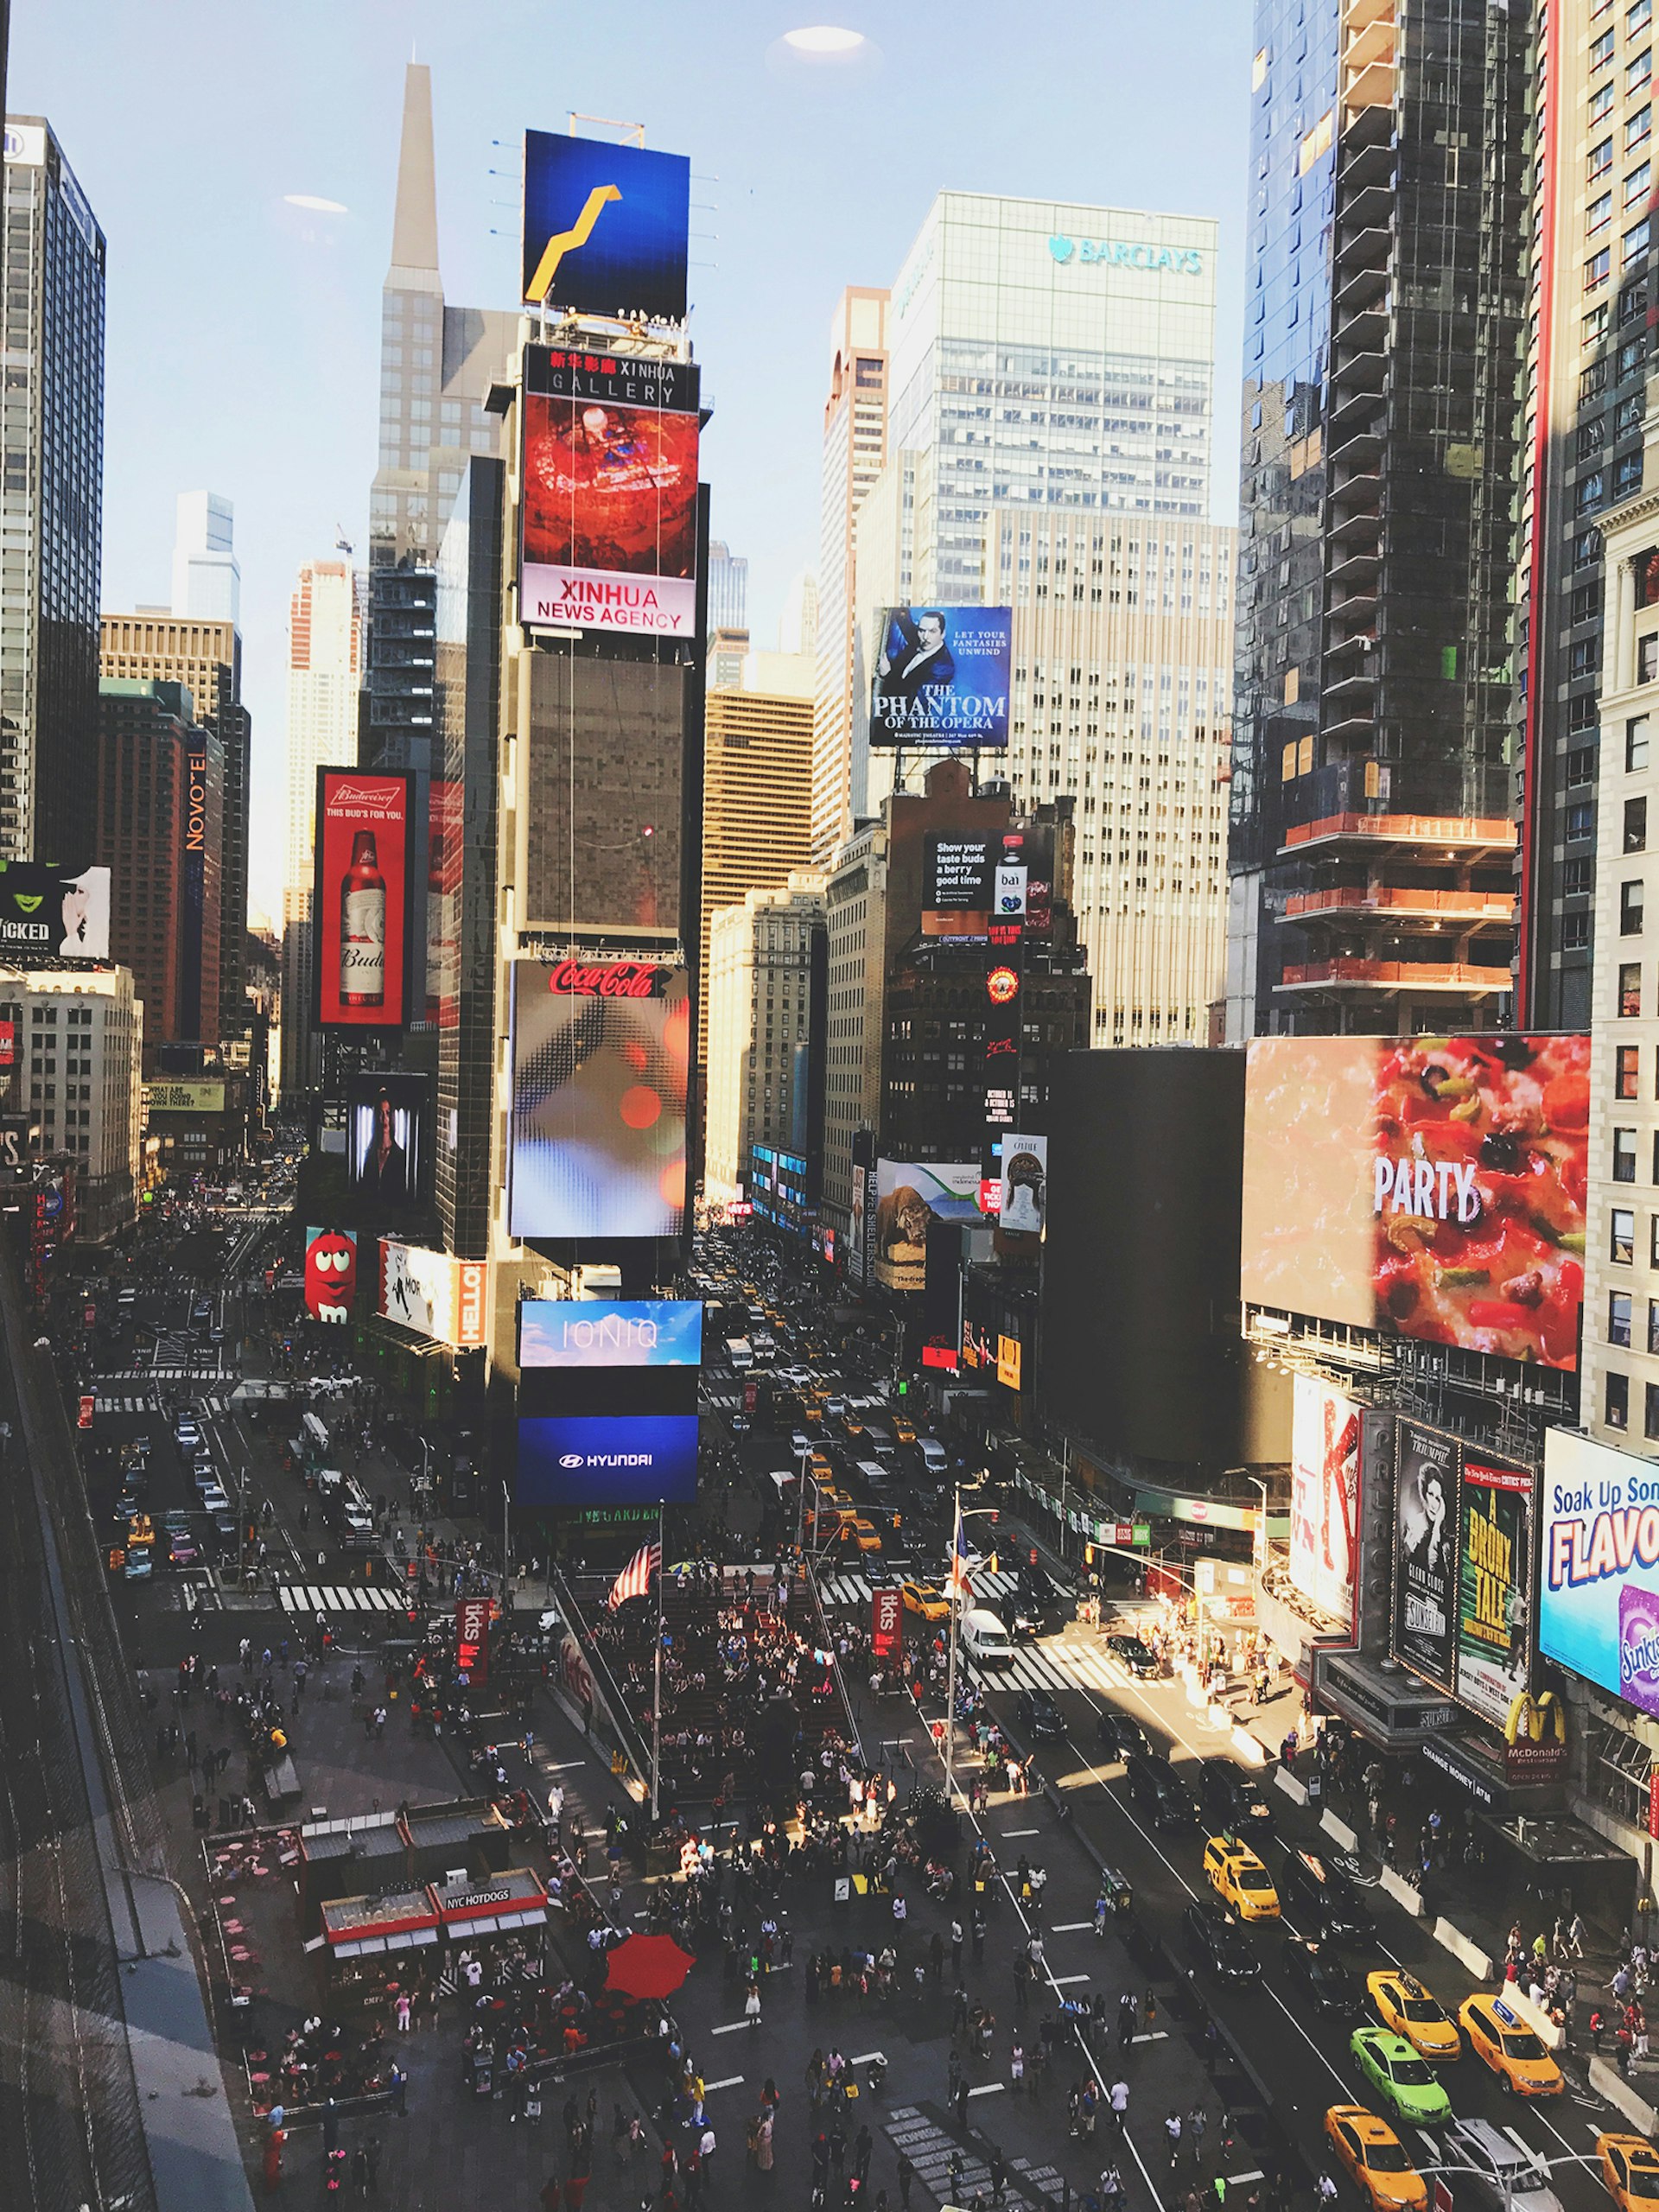 View of Times Square from above